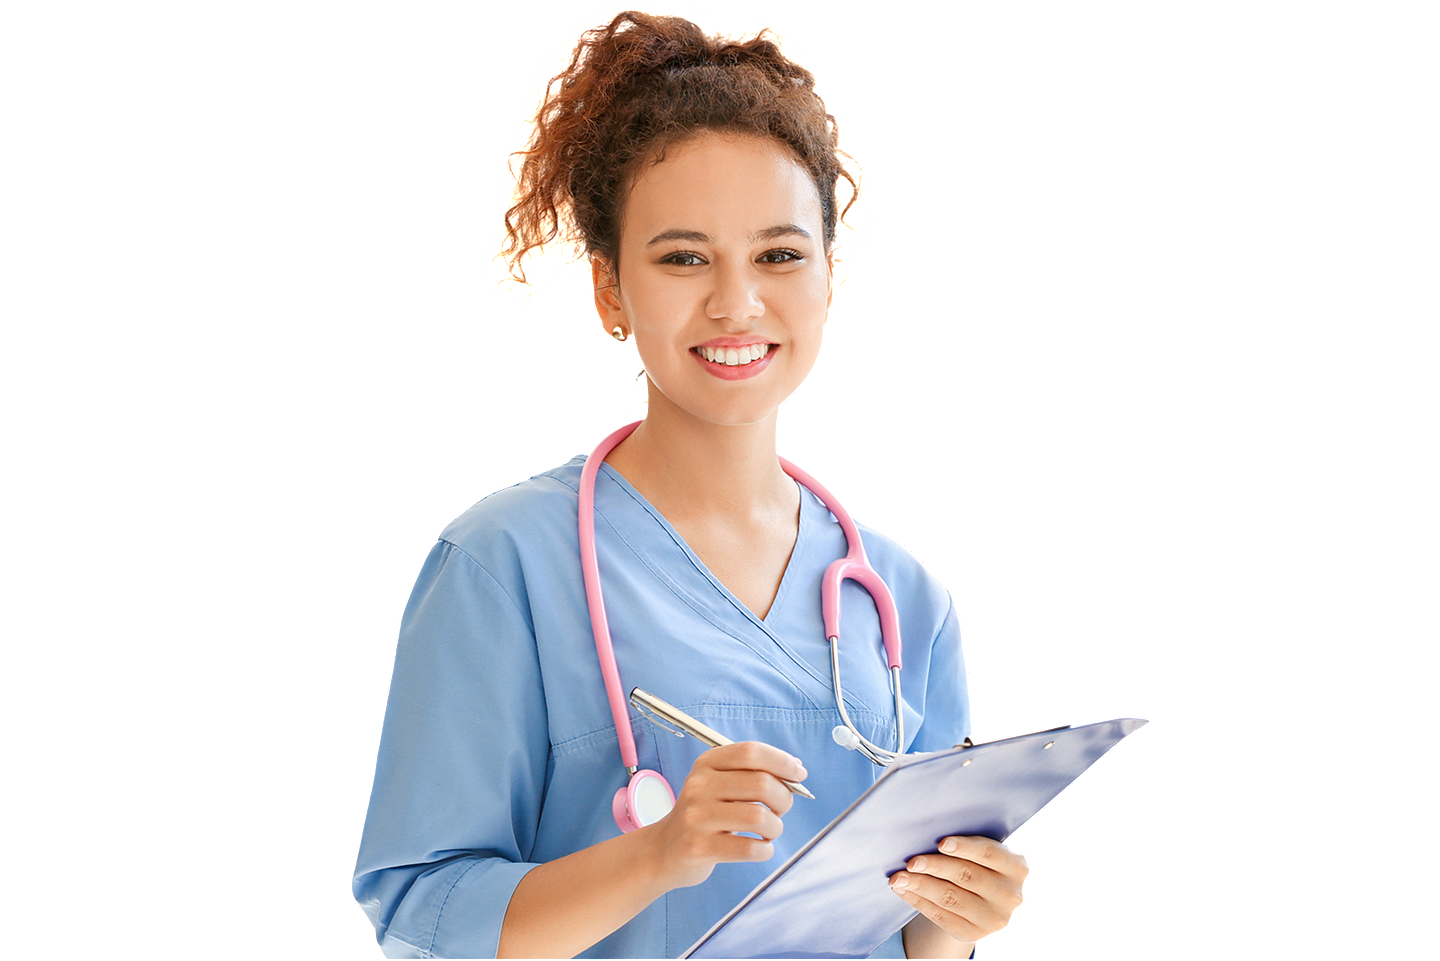 Nurse holding clipboard and smiling at camera